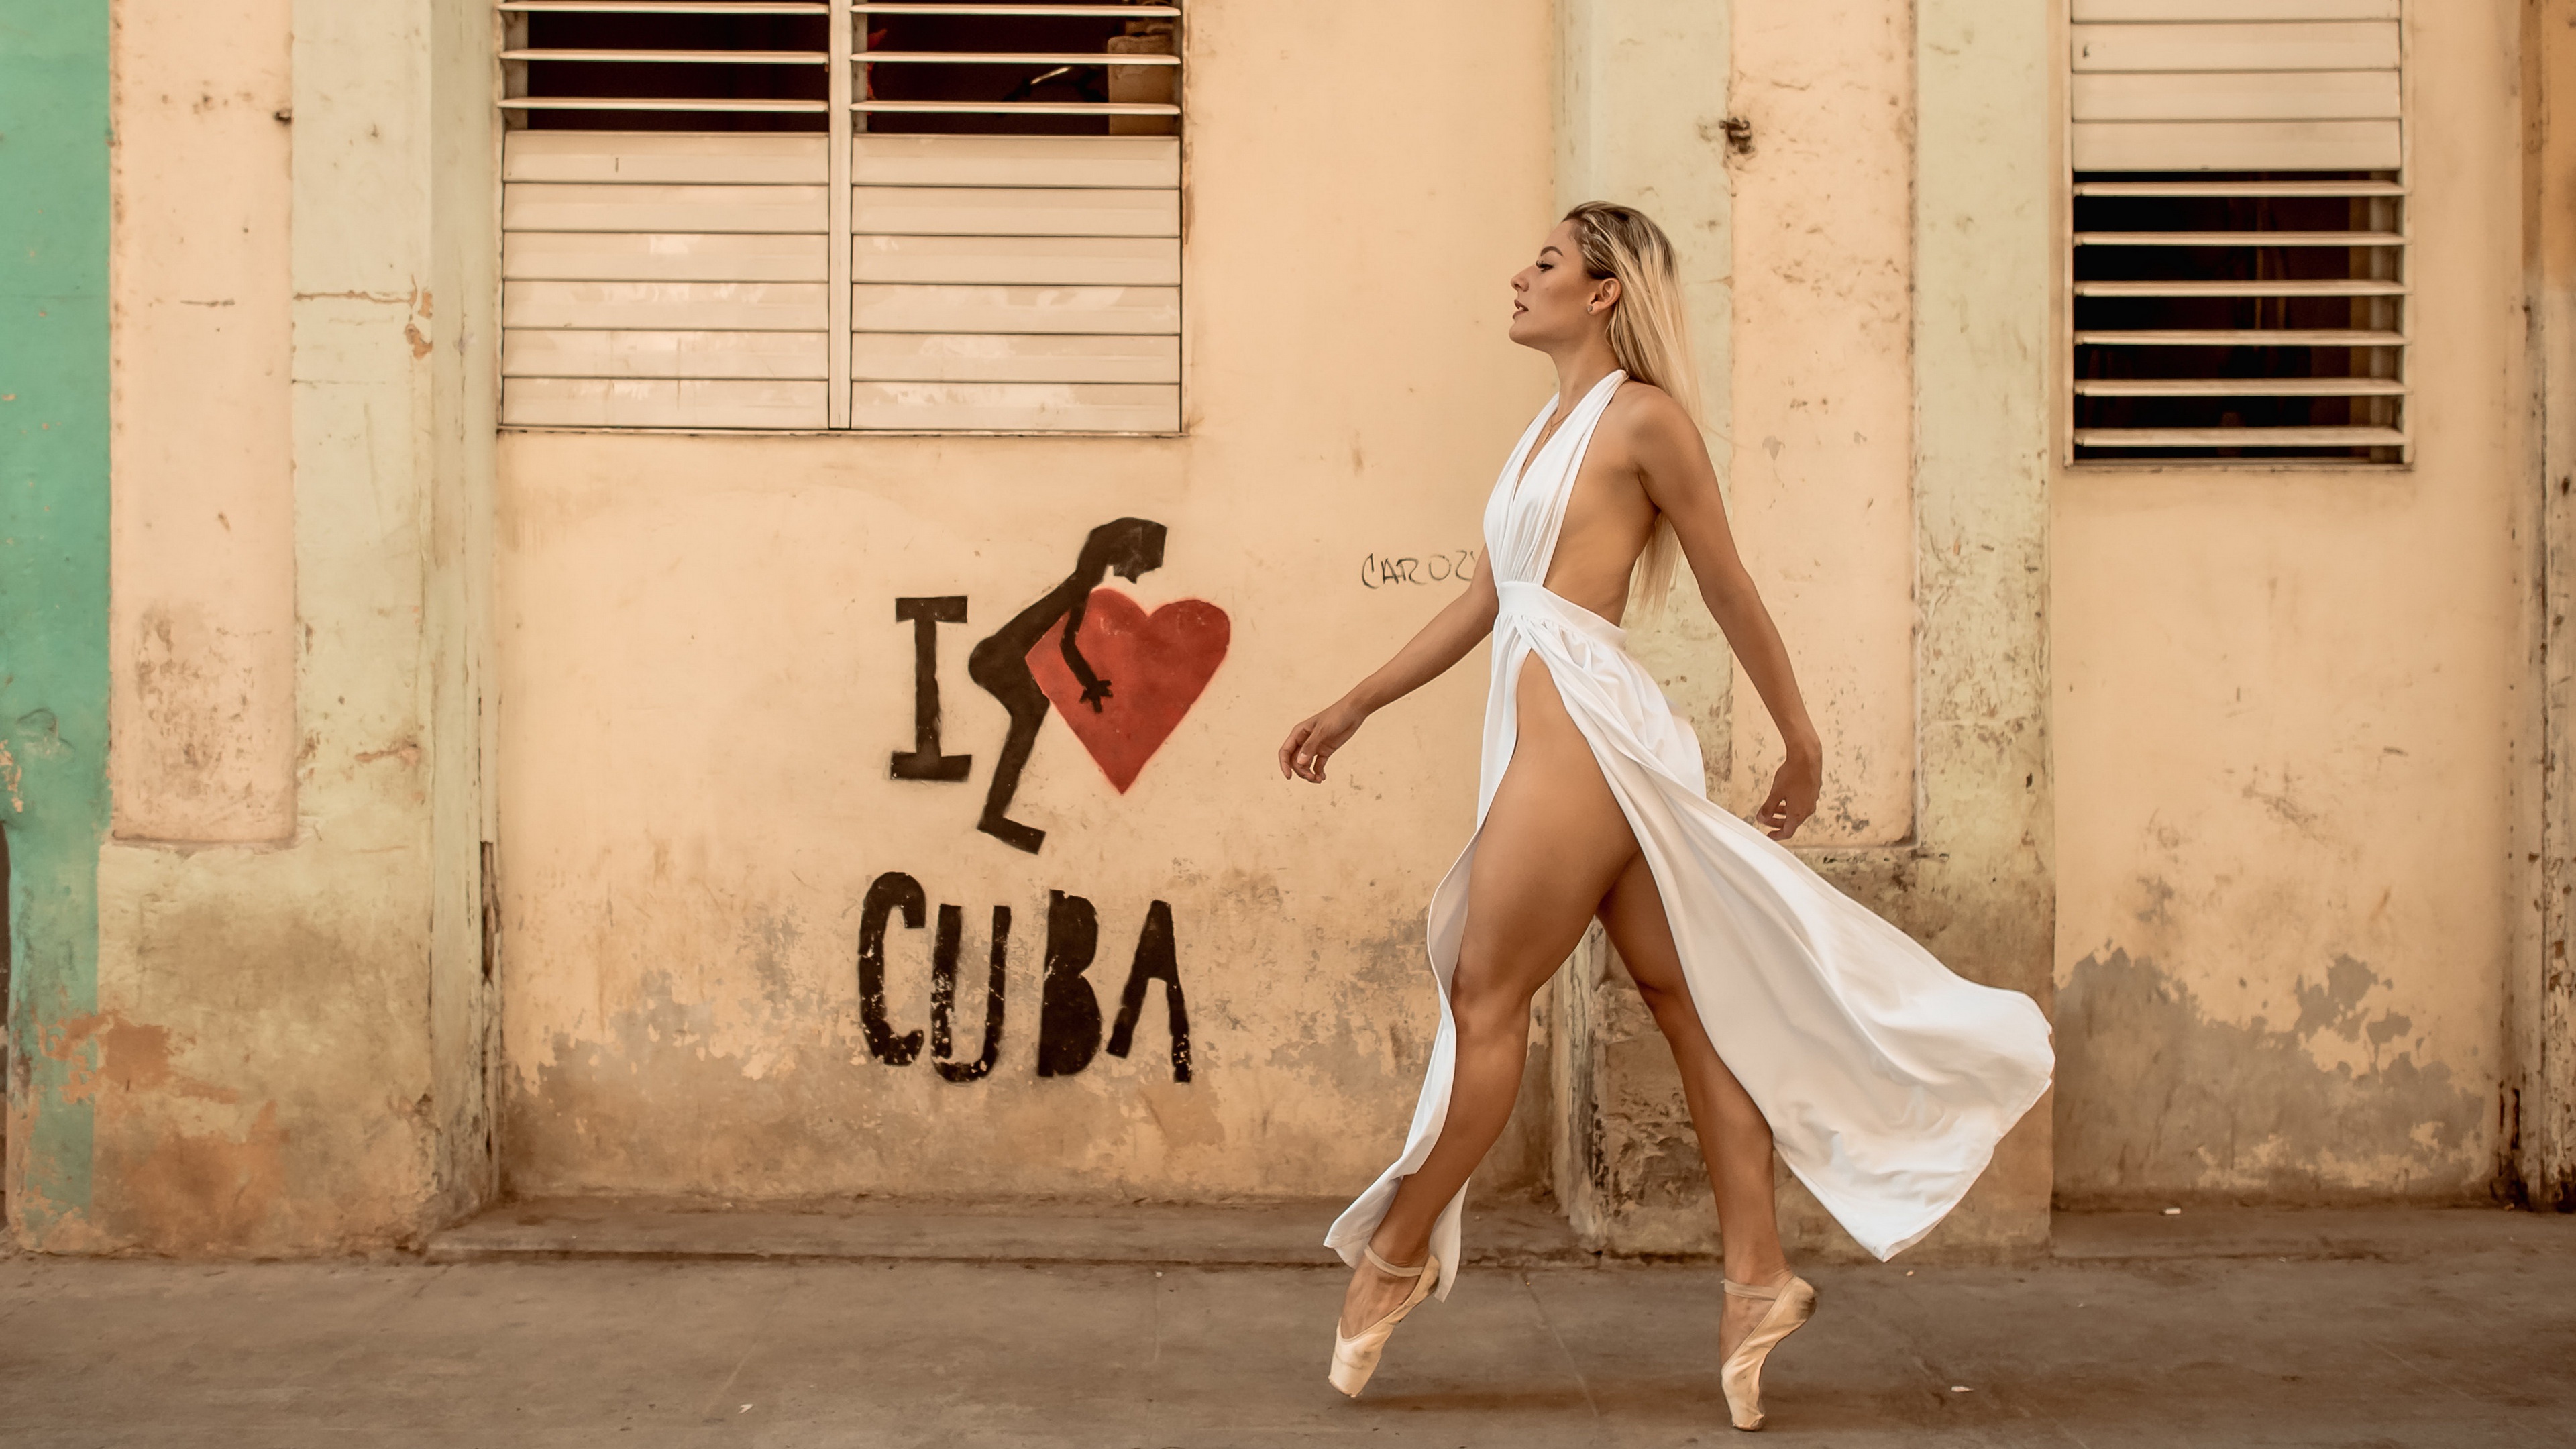 People 3840x2160 Cuba women wall urban women outdoors model outdoors walking tiptoe legs ballet slippers blonde thighs dyed hair face profile no bra pointed toes